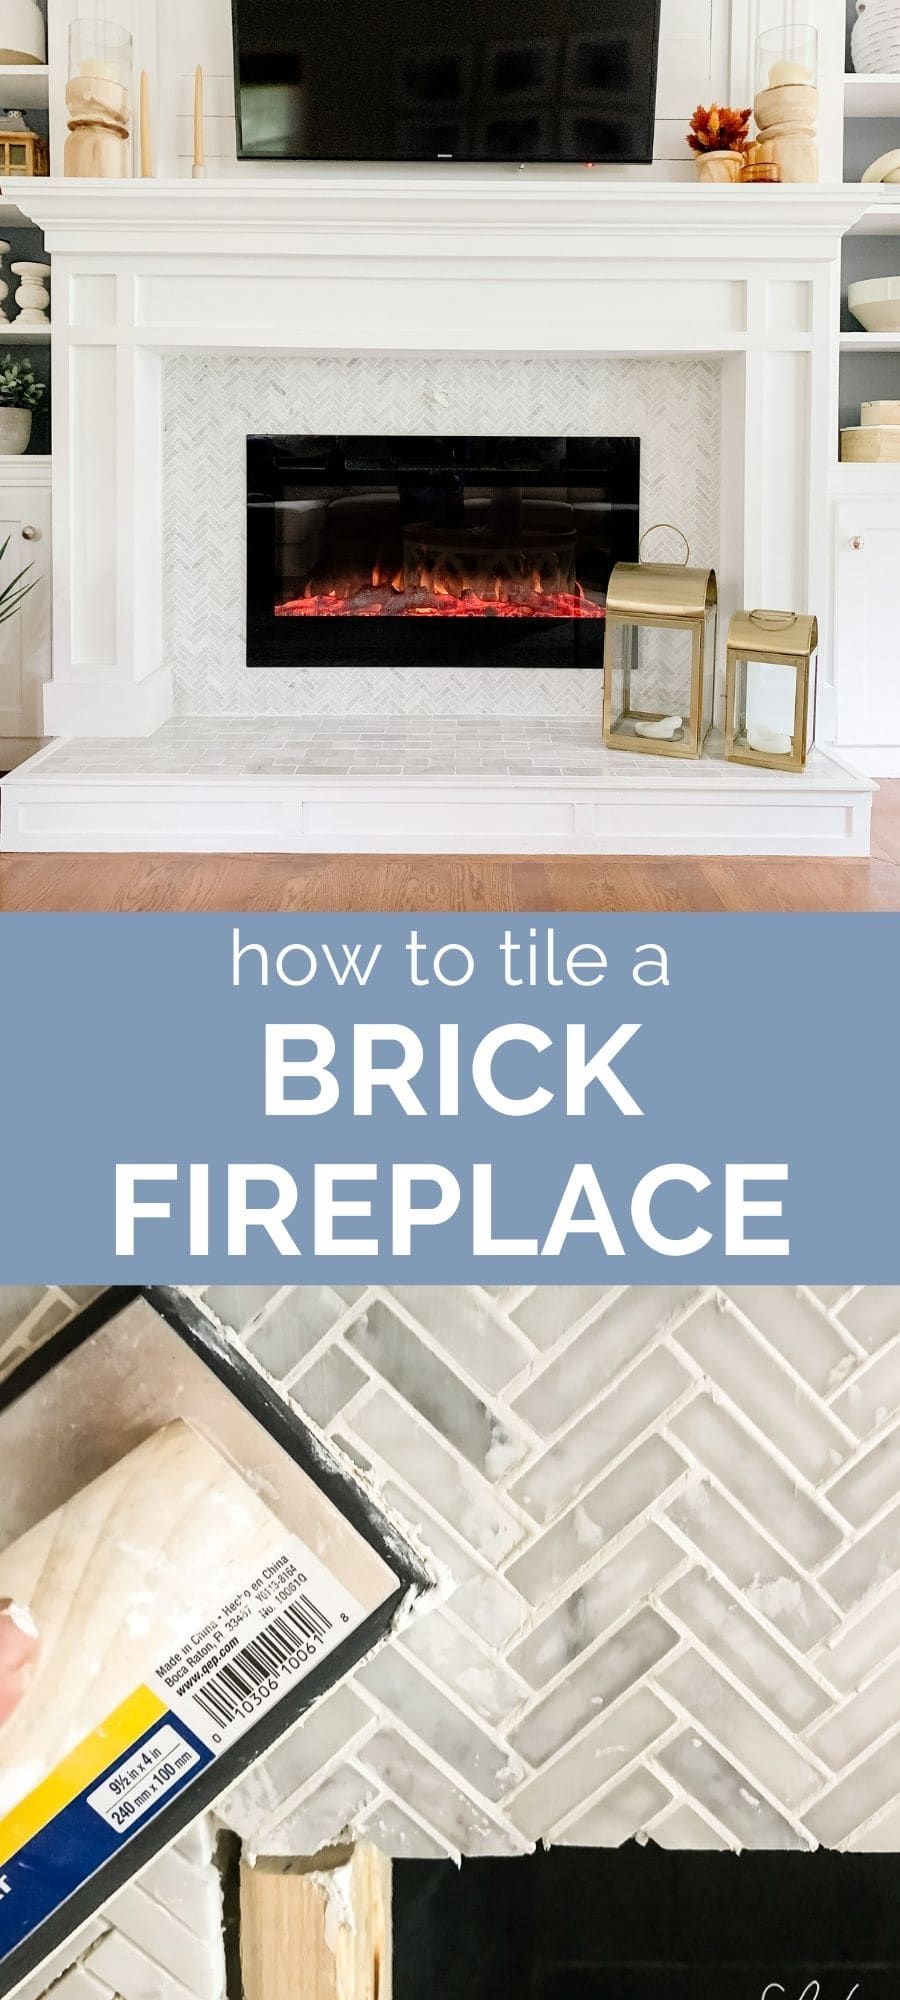 How To Tile A Brick Fireplace Jenna, How To Tile Around A Fireplace Opening